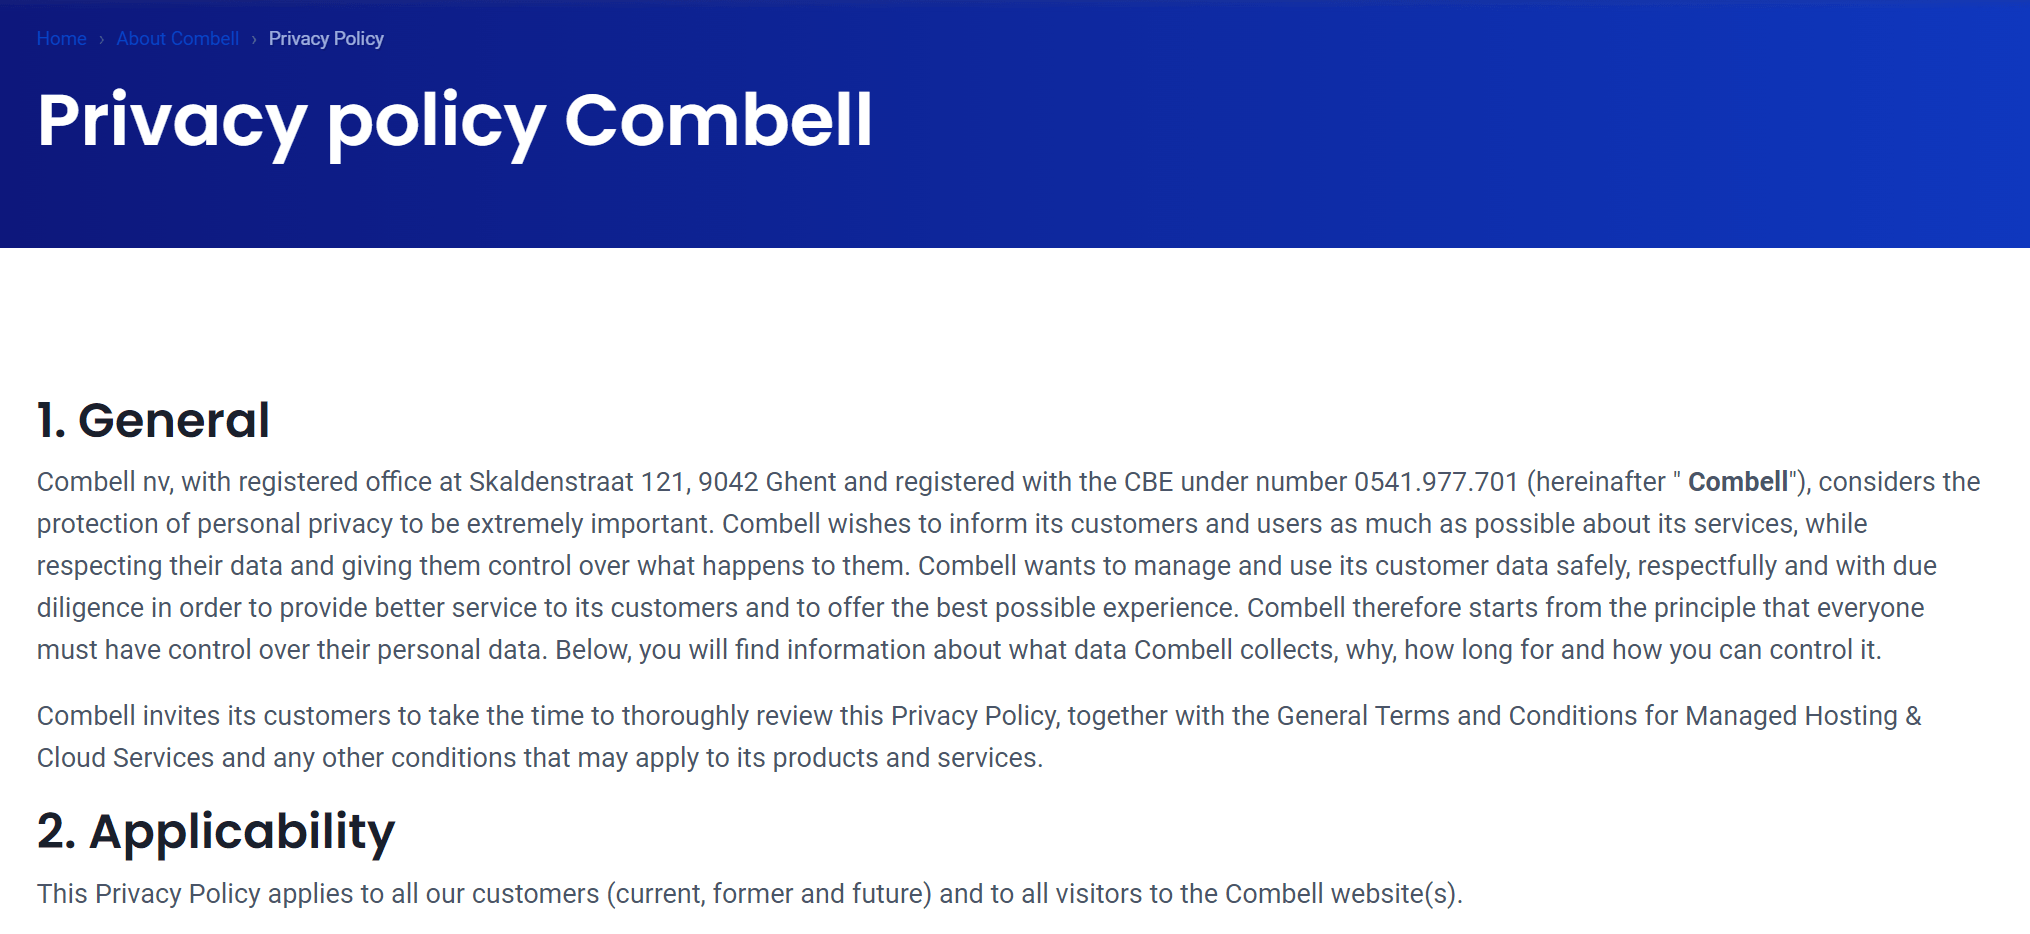 A screenshot of Combell's privacy policy as an example of what a privacy policy can look like.